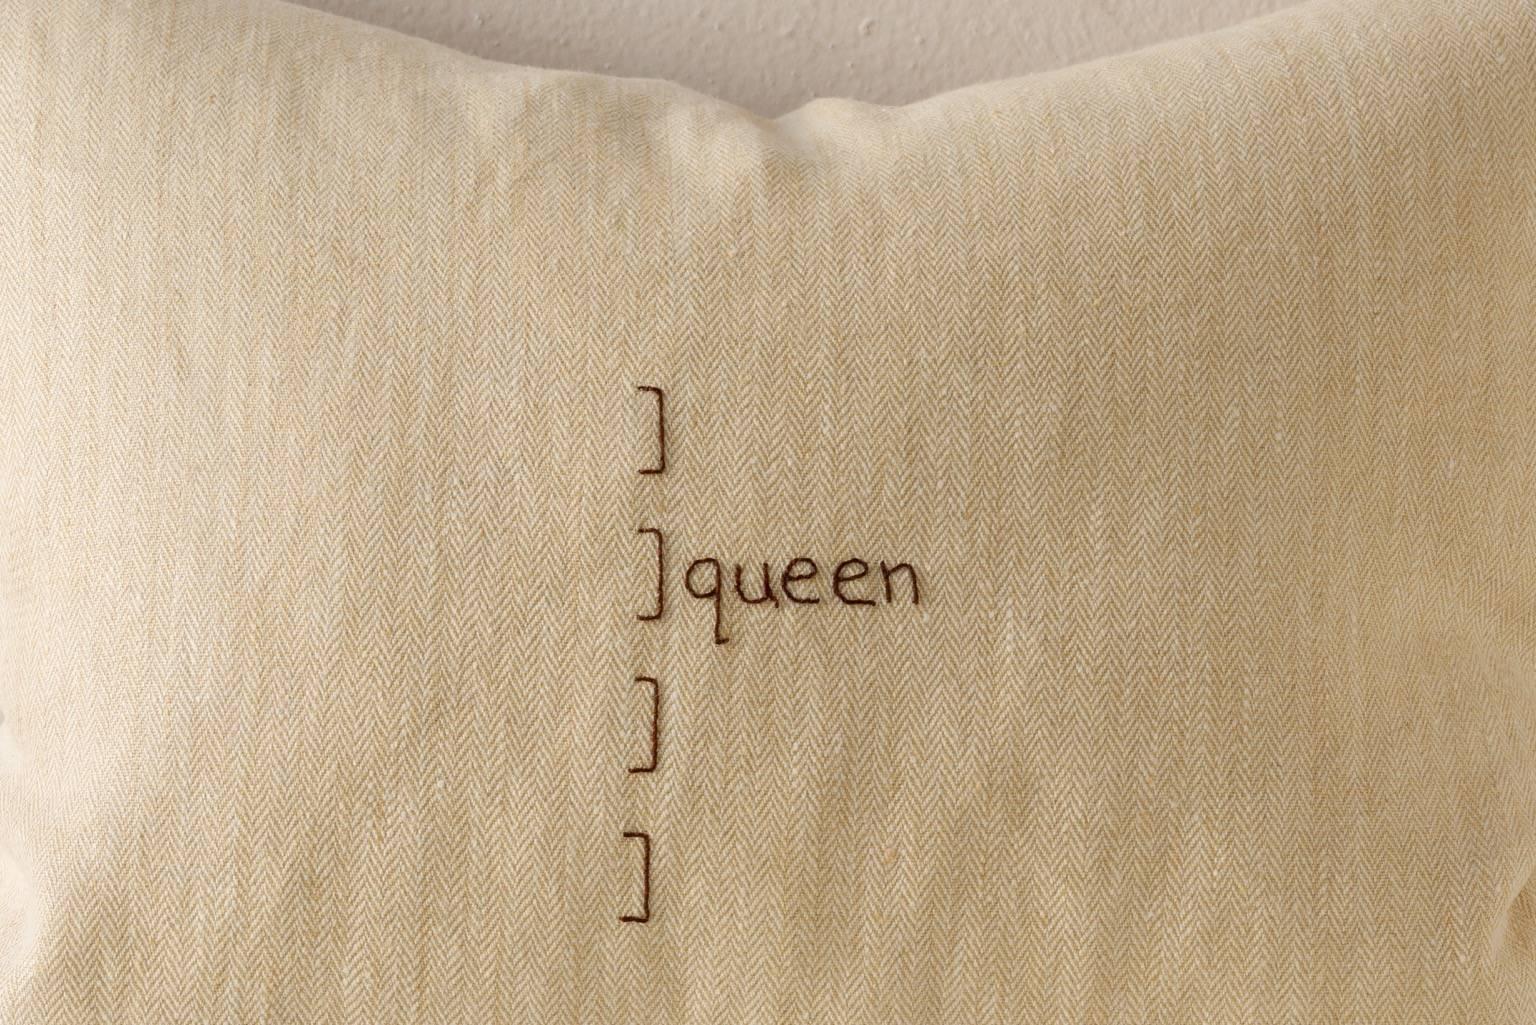 Contemporary cushion in washed soft thick cream herringbone linen with embroidered text from one of Sappho's fragments: 